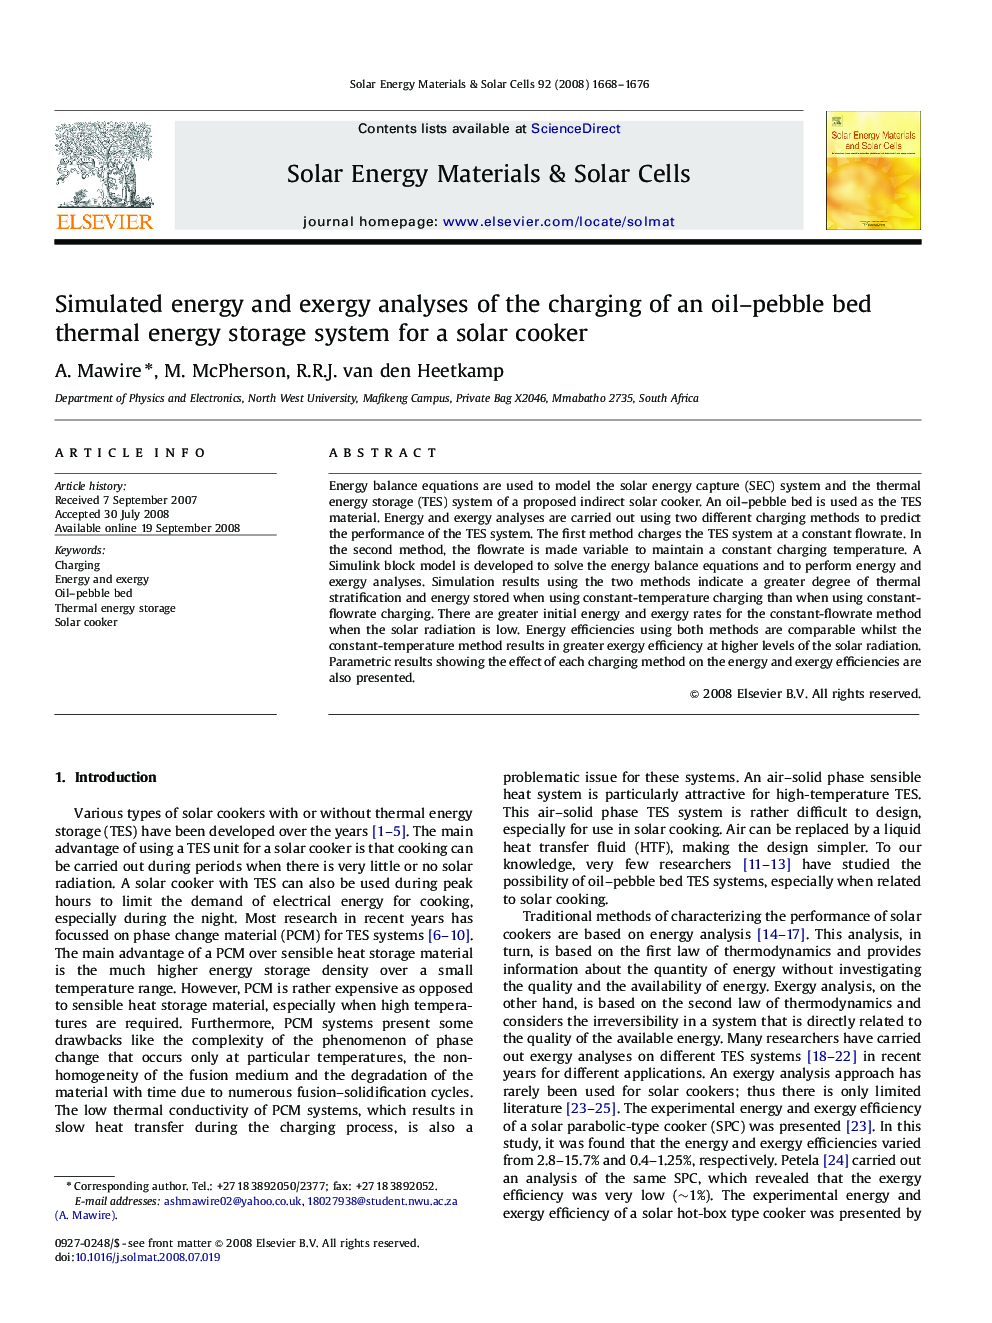 Simulated energy and exergy analyses of the charging of an oil–pebble bed thermal energy storage system for a solar cooker